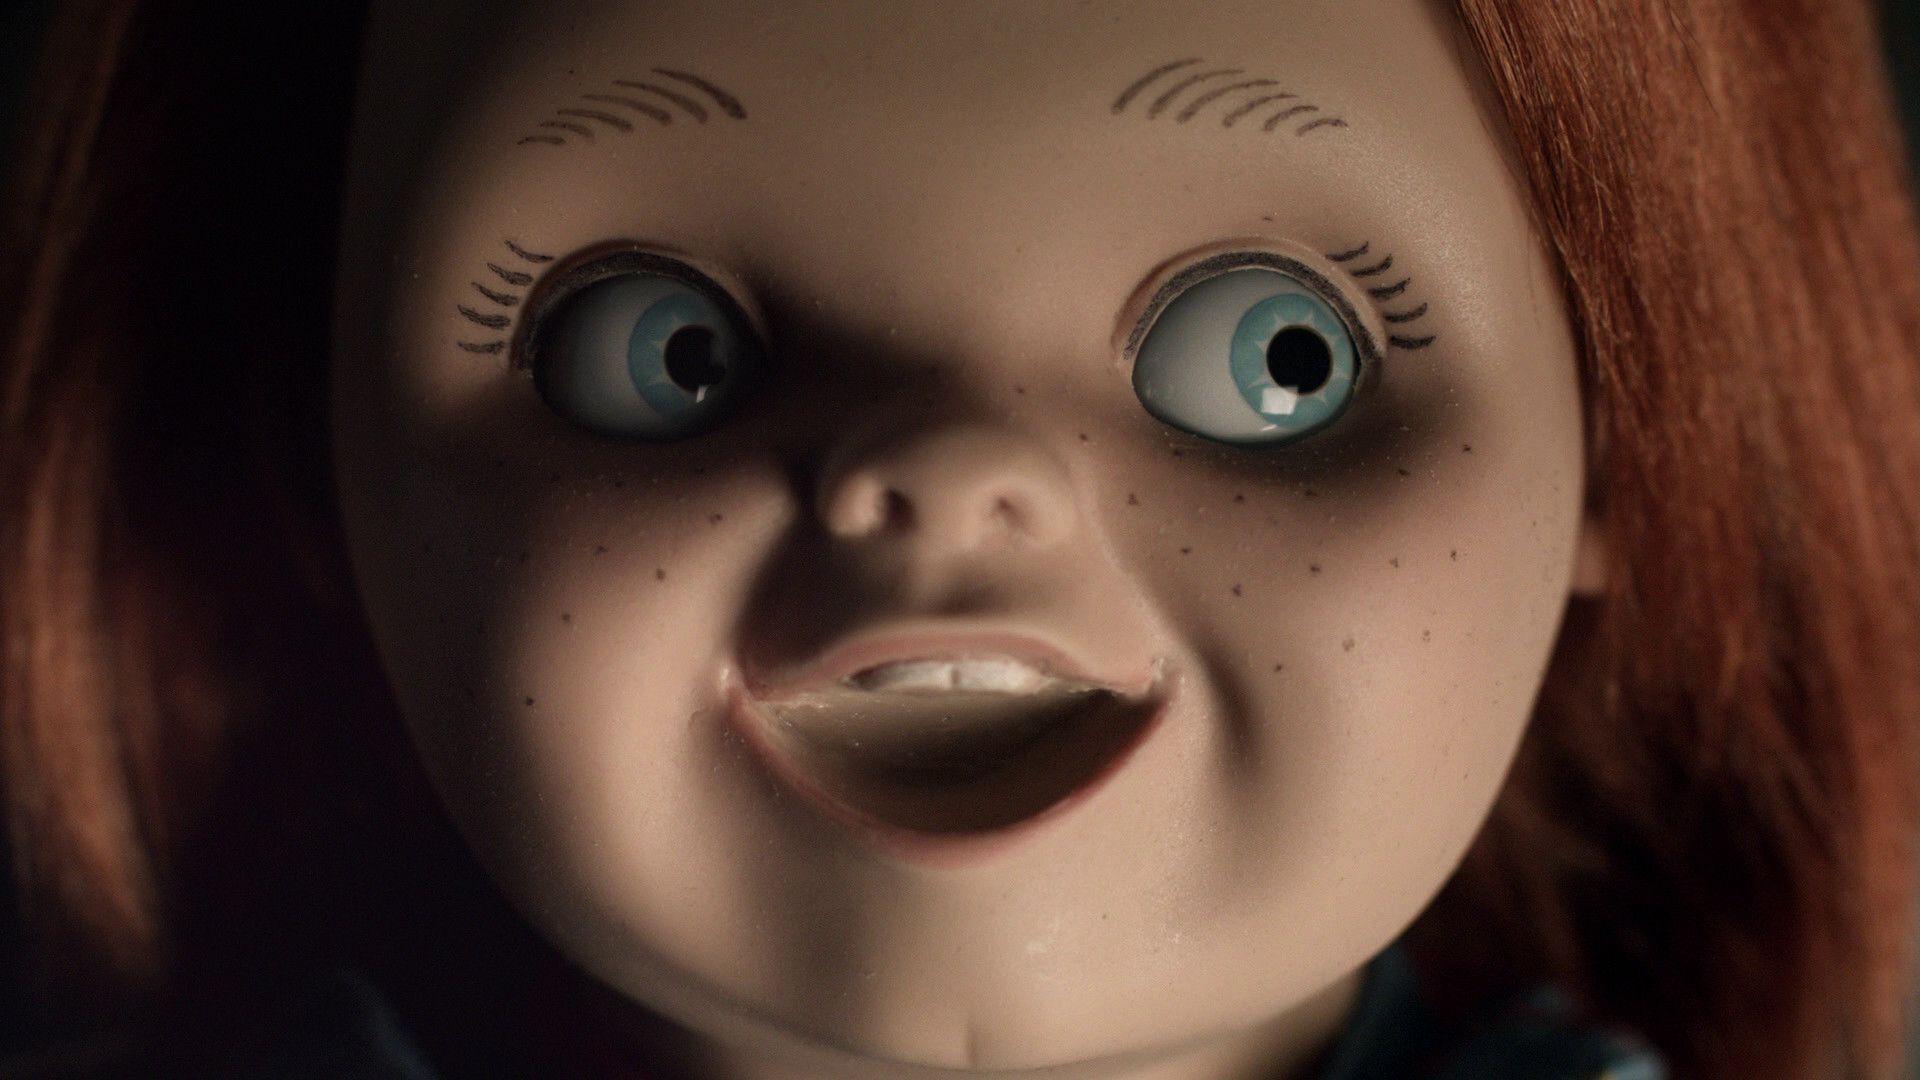 Curse of Chucky 2013 Wallpaper & Picture